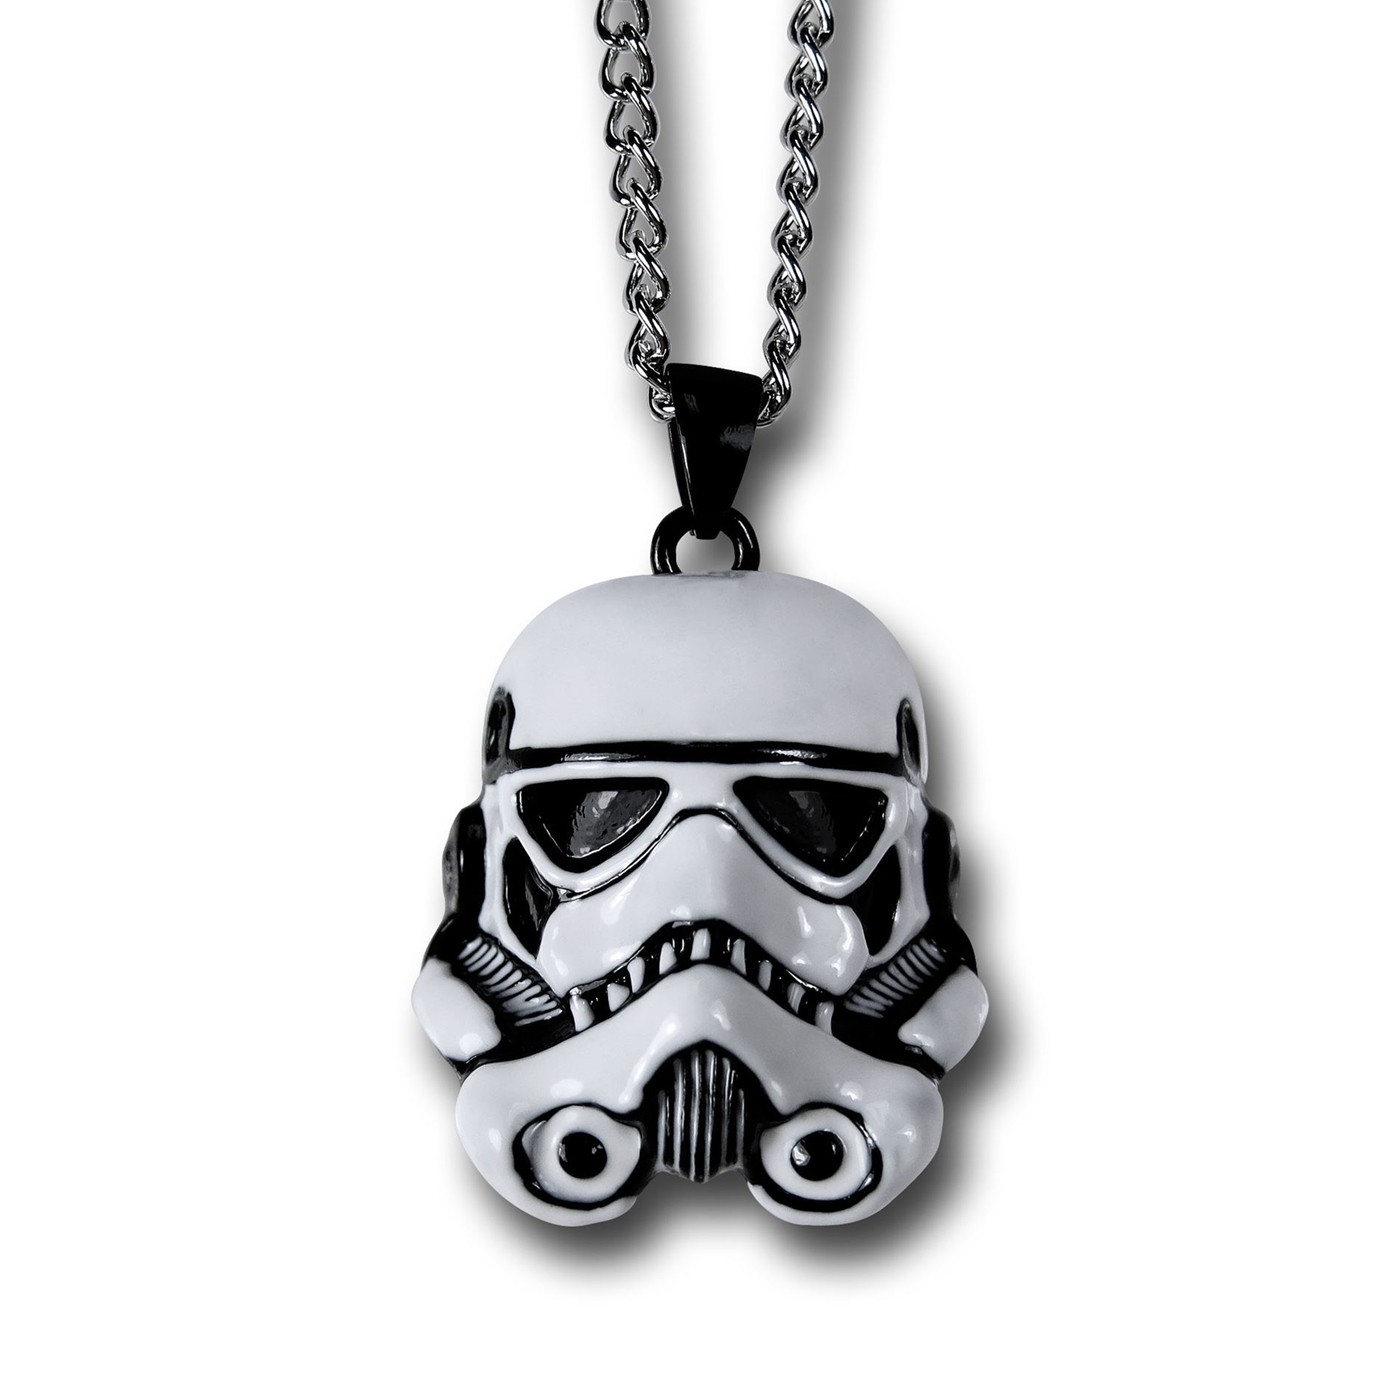 Star Wars Stormtrooper Charm Necklace